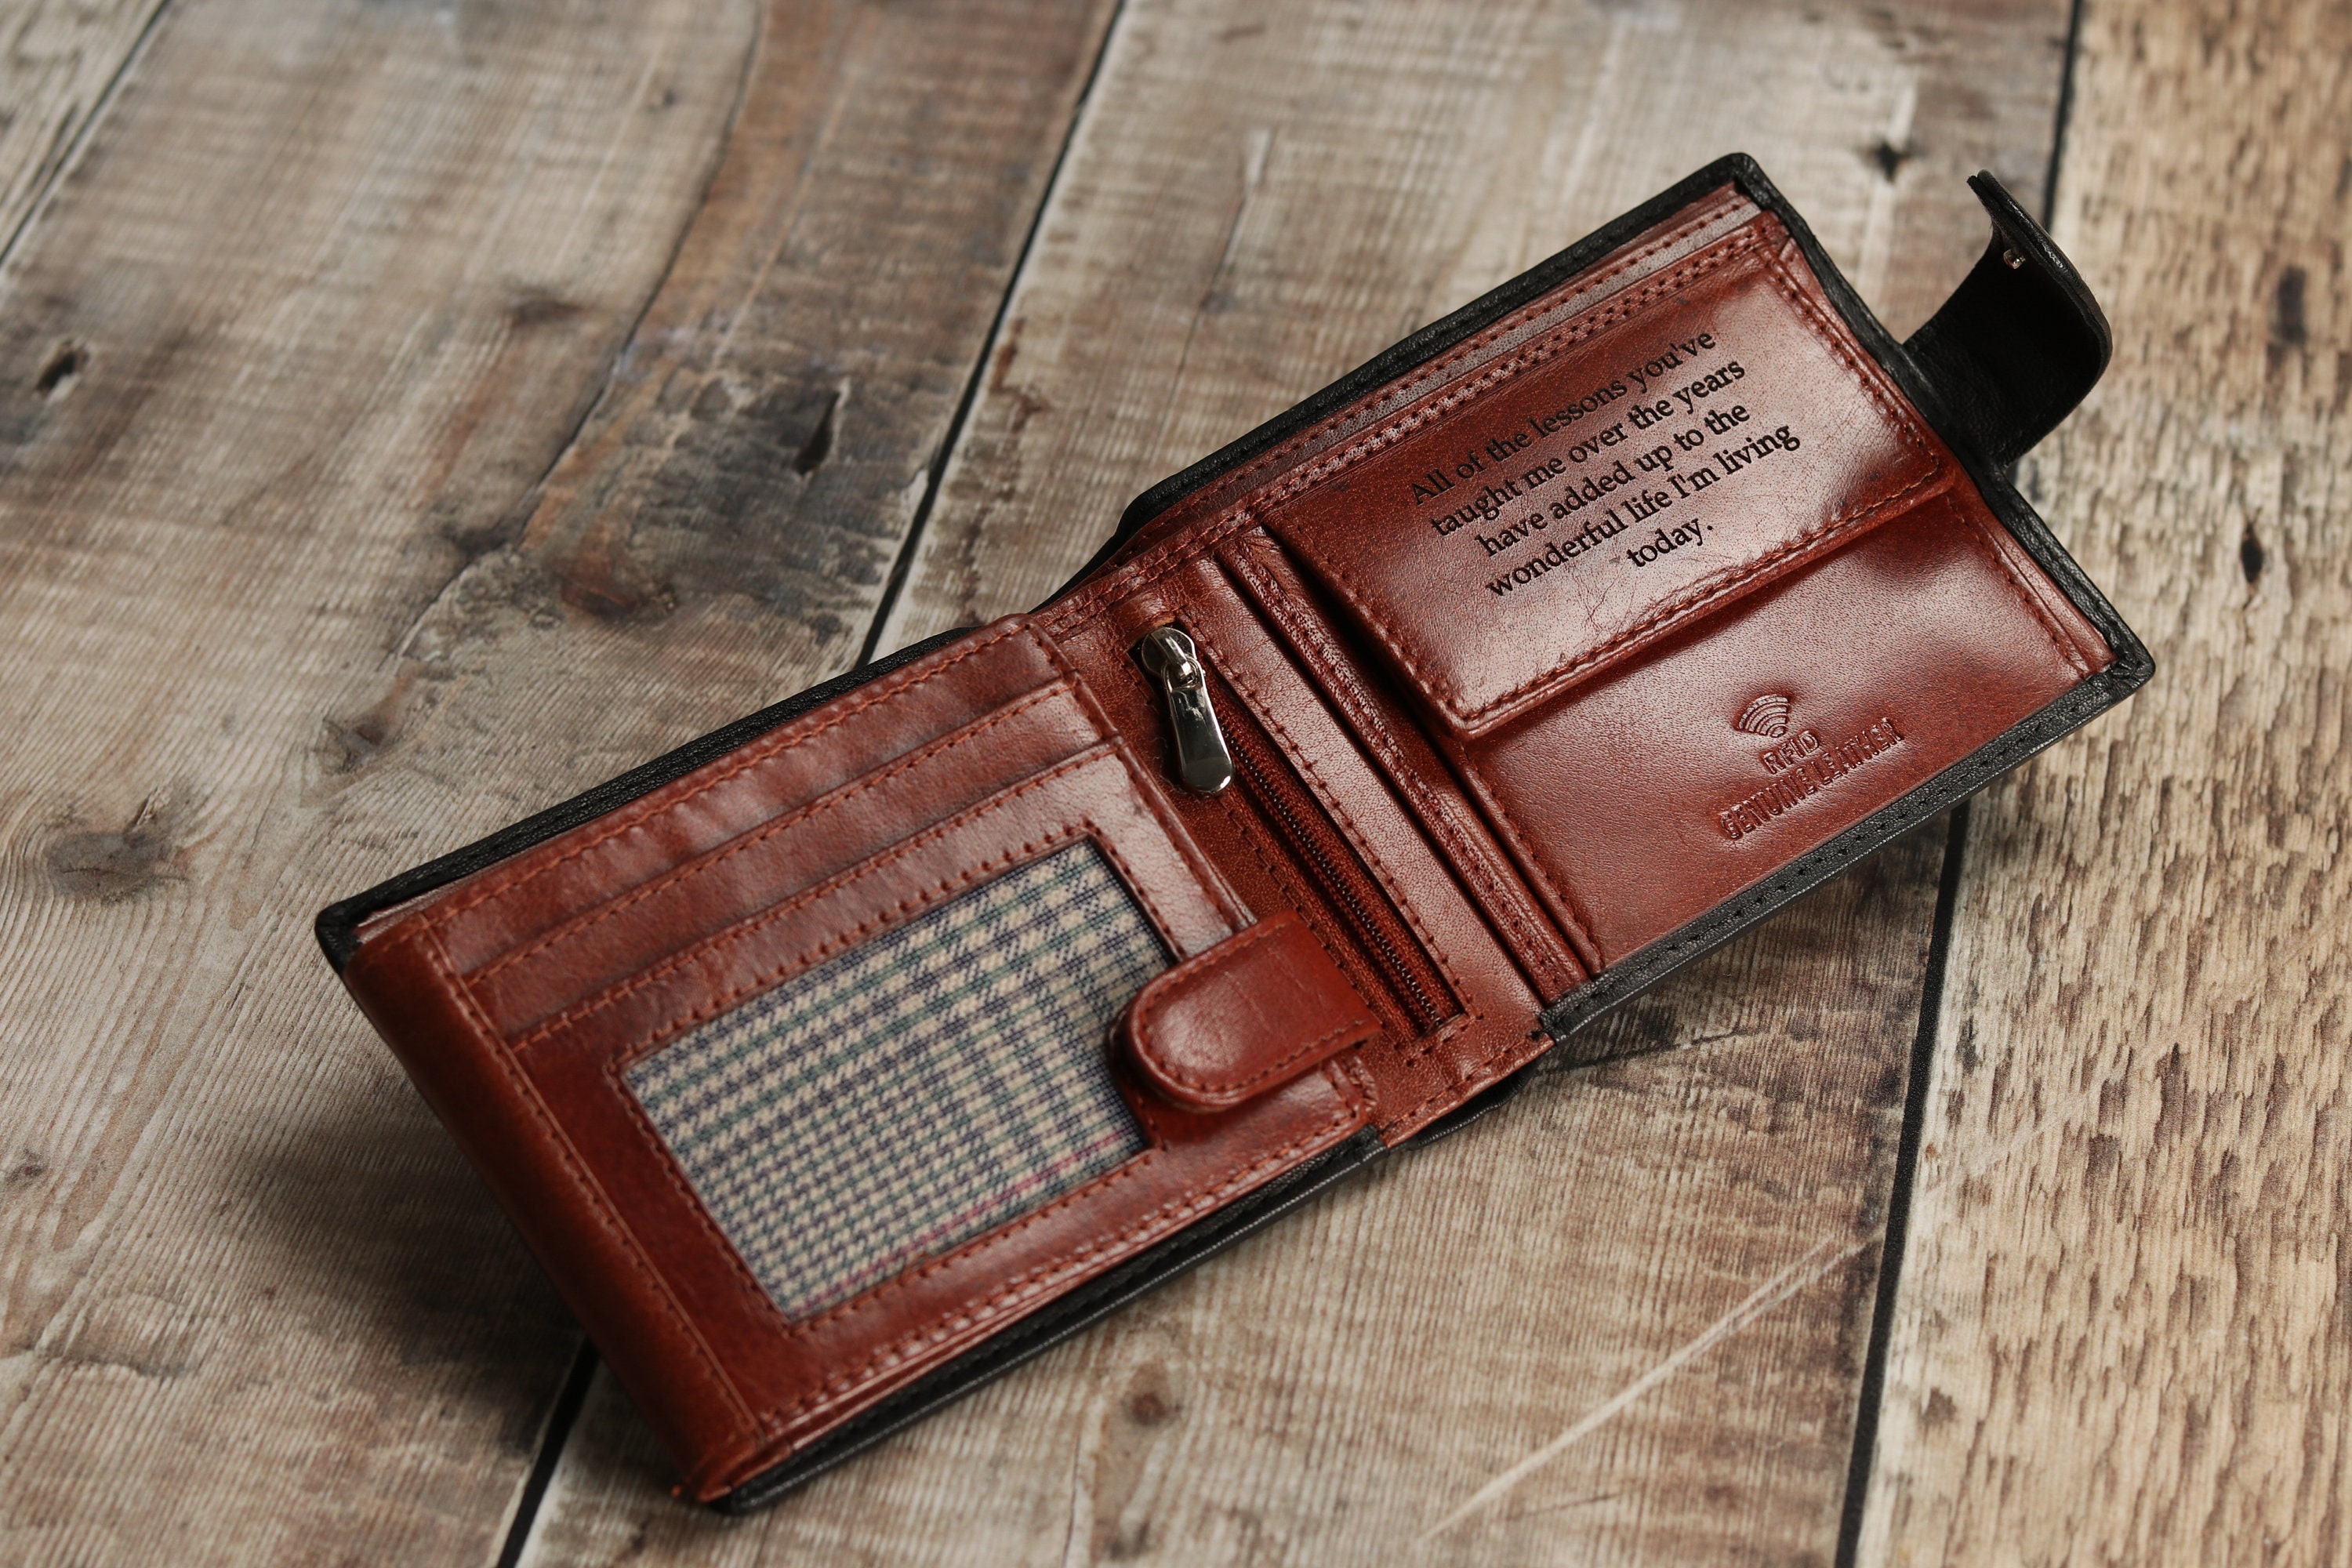 Men's Wallet Brands: 22 Wallets That Compliment Any Outfit